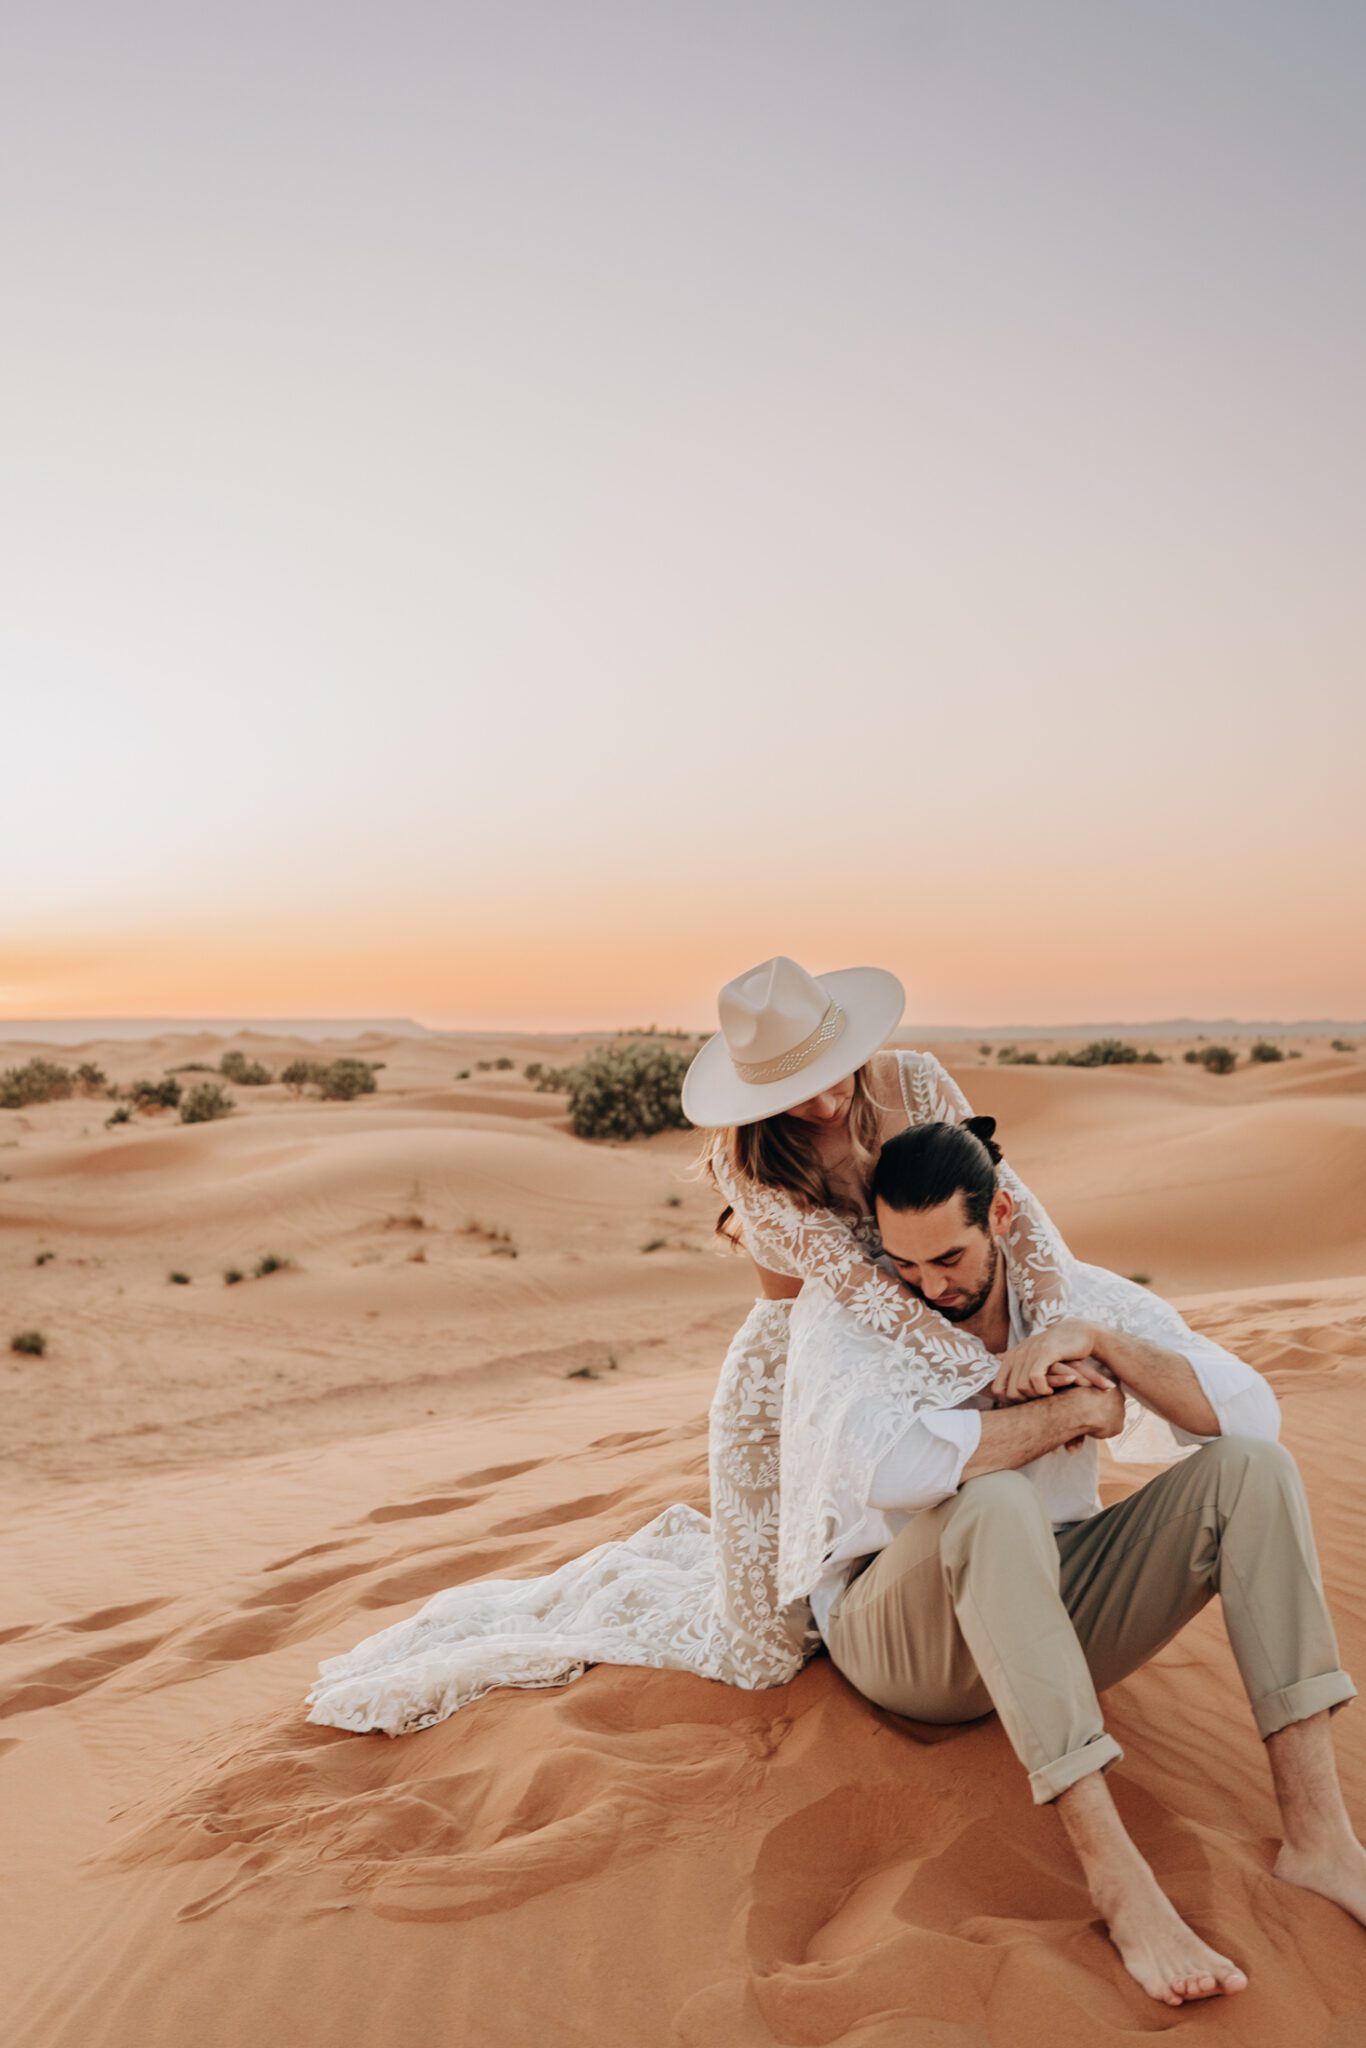 Couple sitting in the sand dunes of the Sahara Desert with golden sunrise in the distance, engagement session inspiration